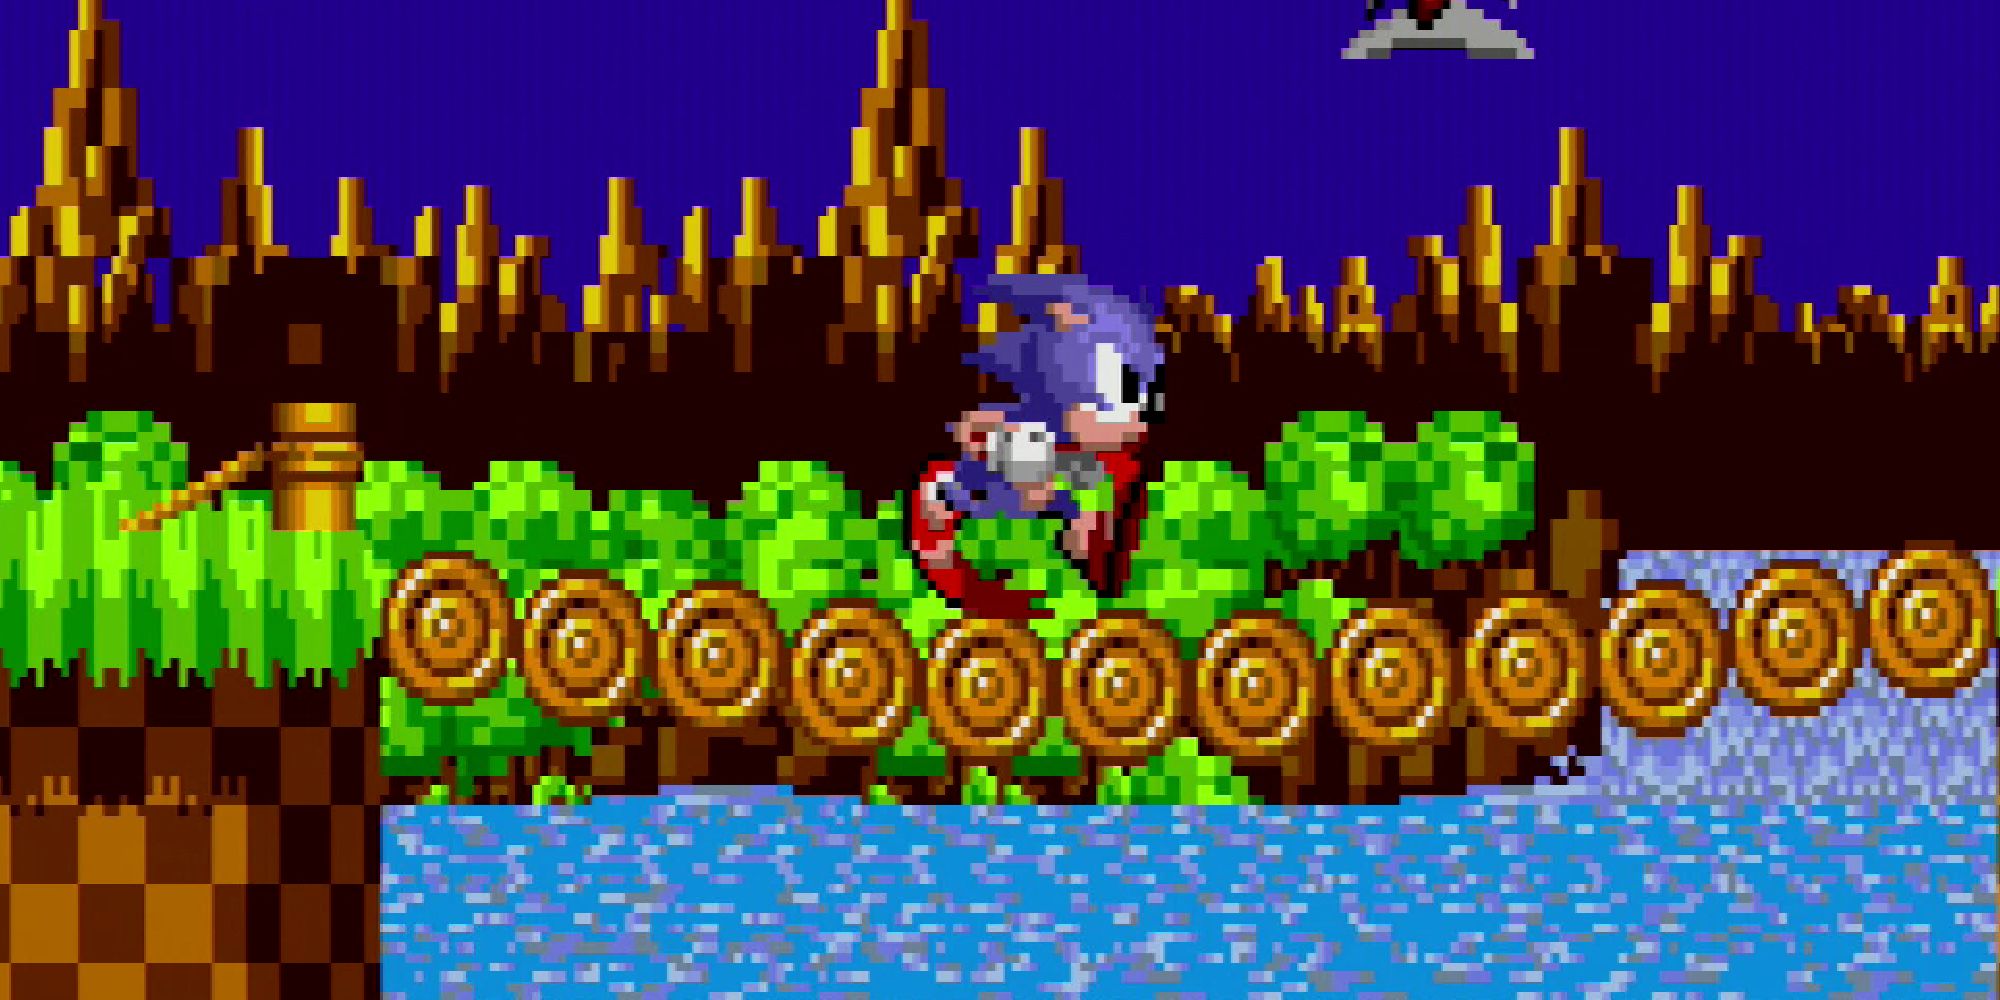 Sonic running over a log bridge in Green Hill Zone in Sonic the Hedgehog